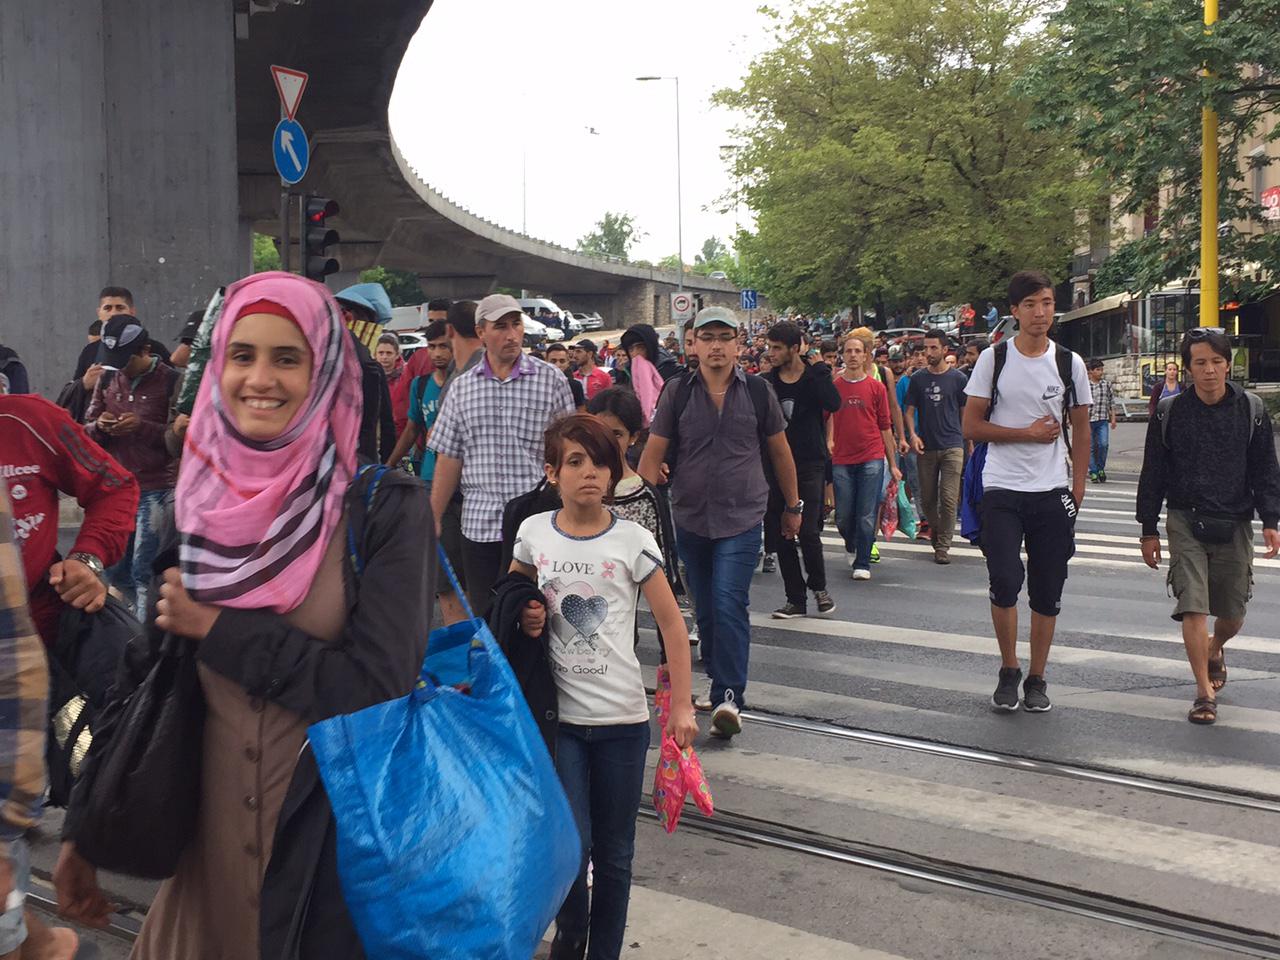 Refugees march from Hungary to Austria, September 5, 2015.